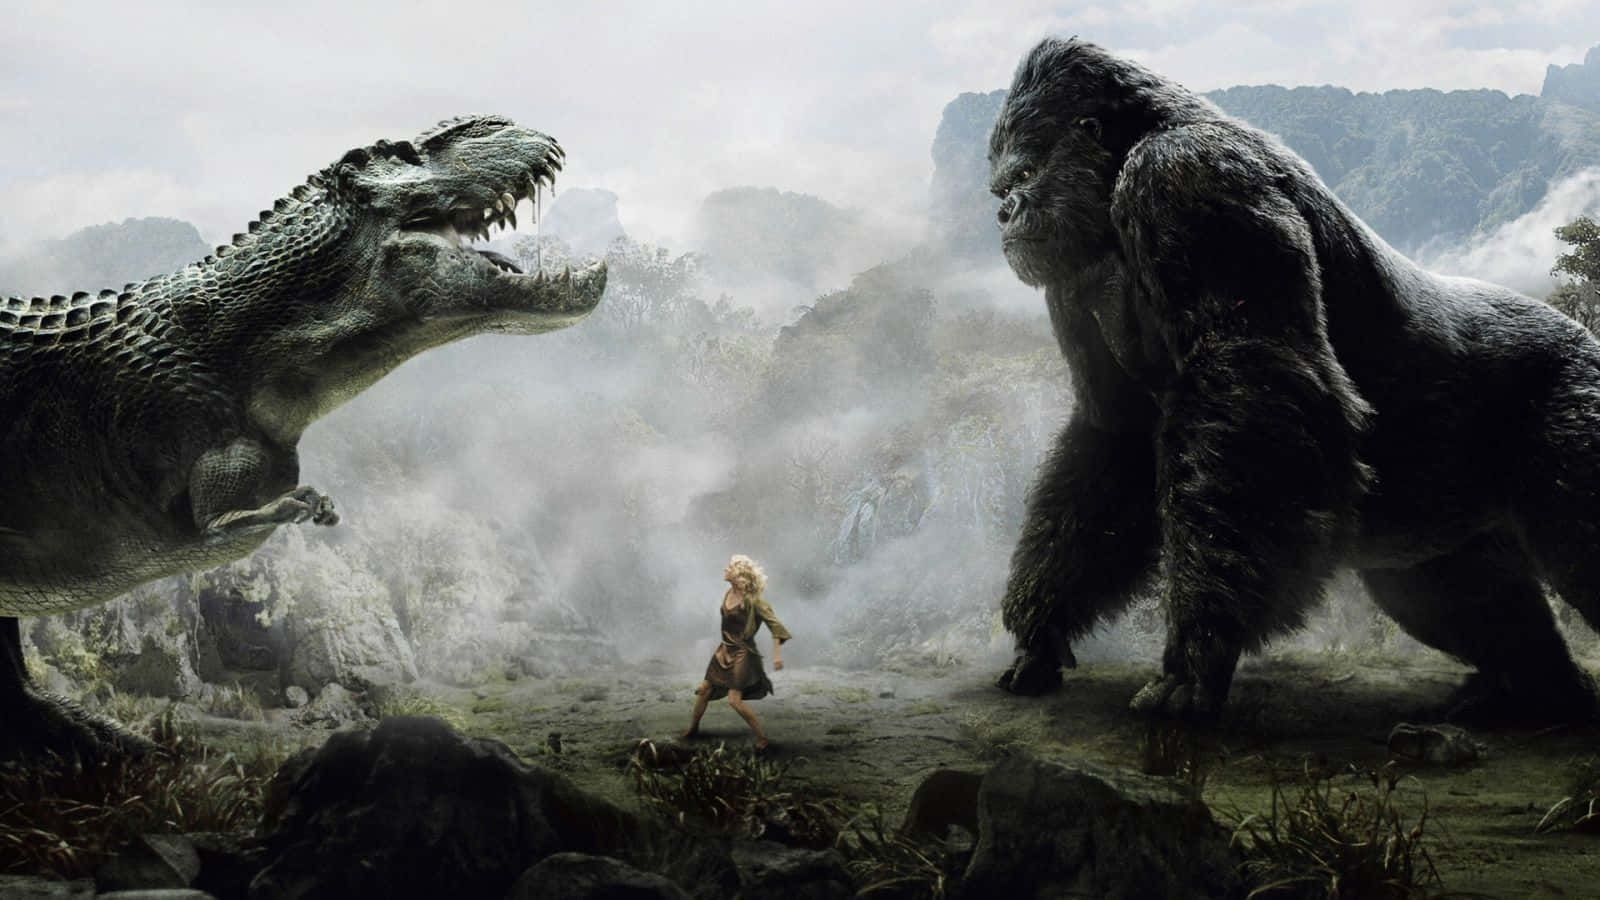 King Kong - A Woman And A Tyrannosaurus In The Jungle